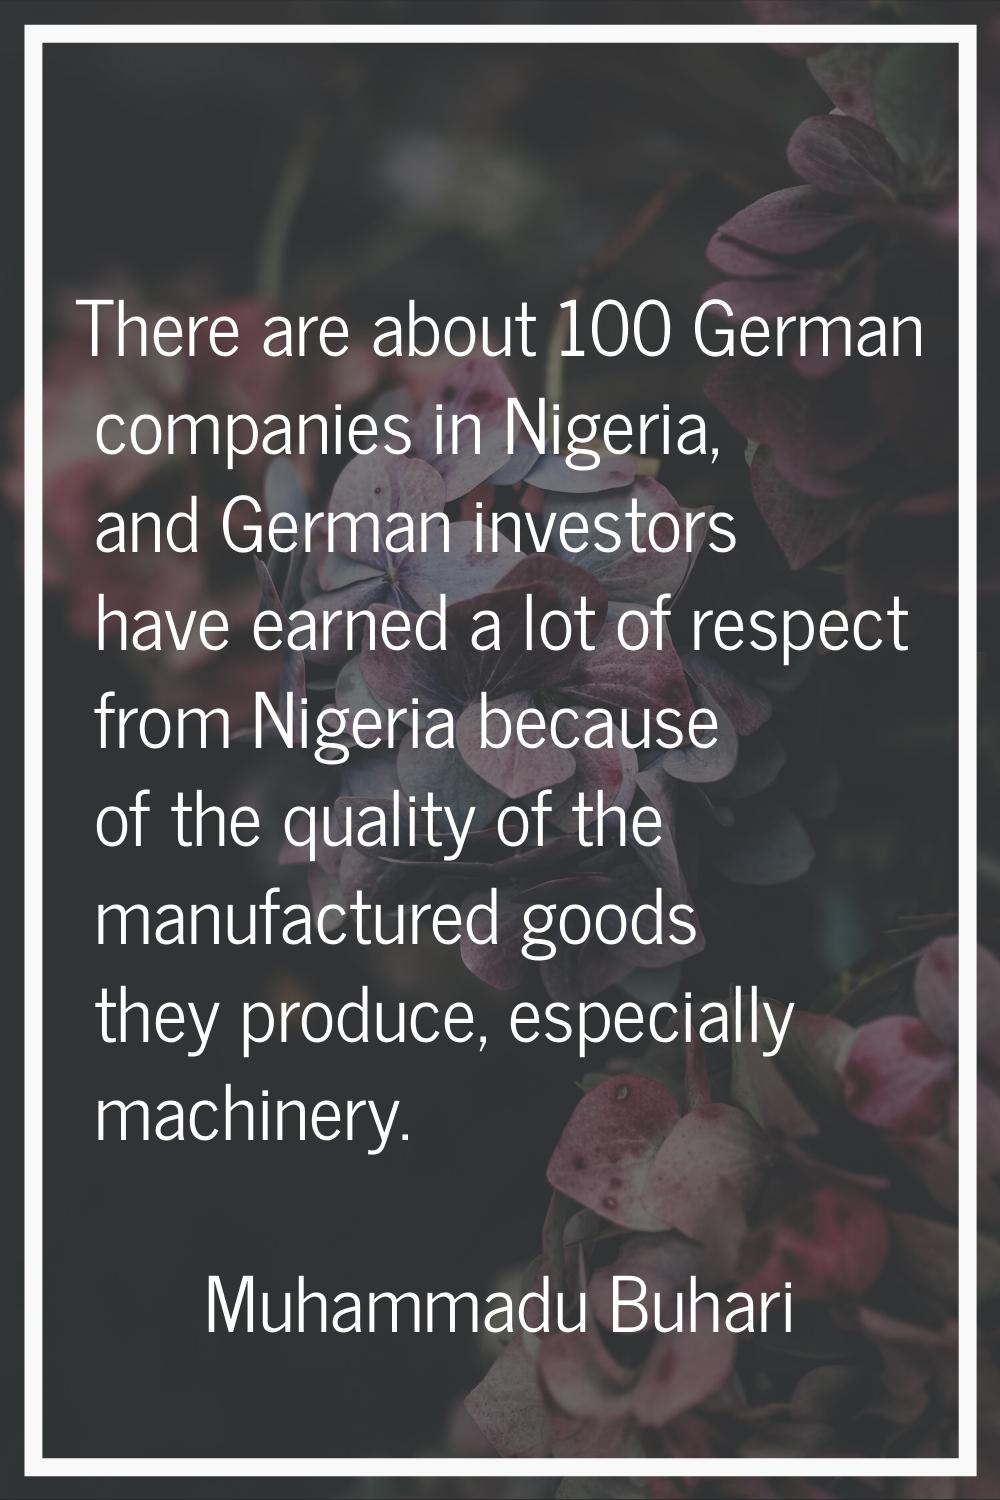 There are about 100 German companies in Nigeria, and German investors have earned a lot of respect 